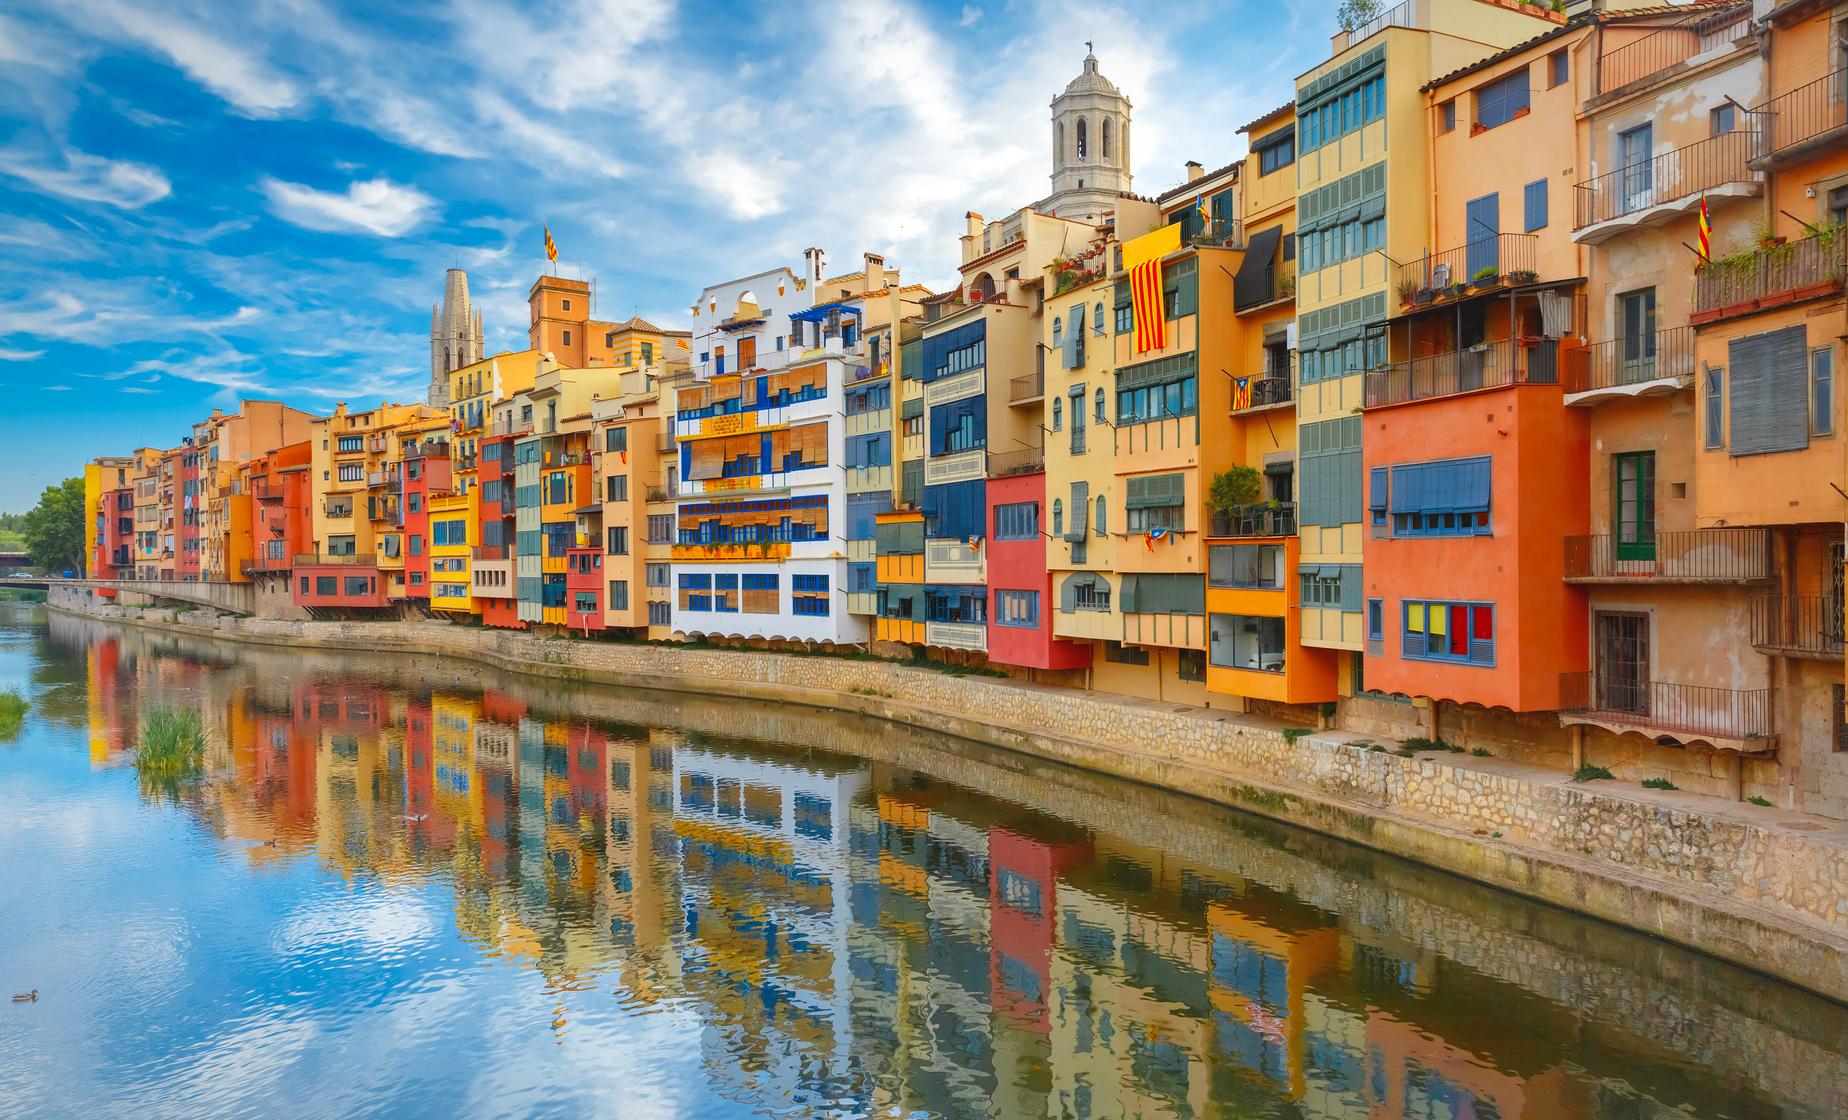 Exclusive Girona and Costa Brava Day Trip from Barcelona (Onyar River, Calella de Palafrugell)